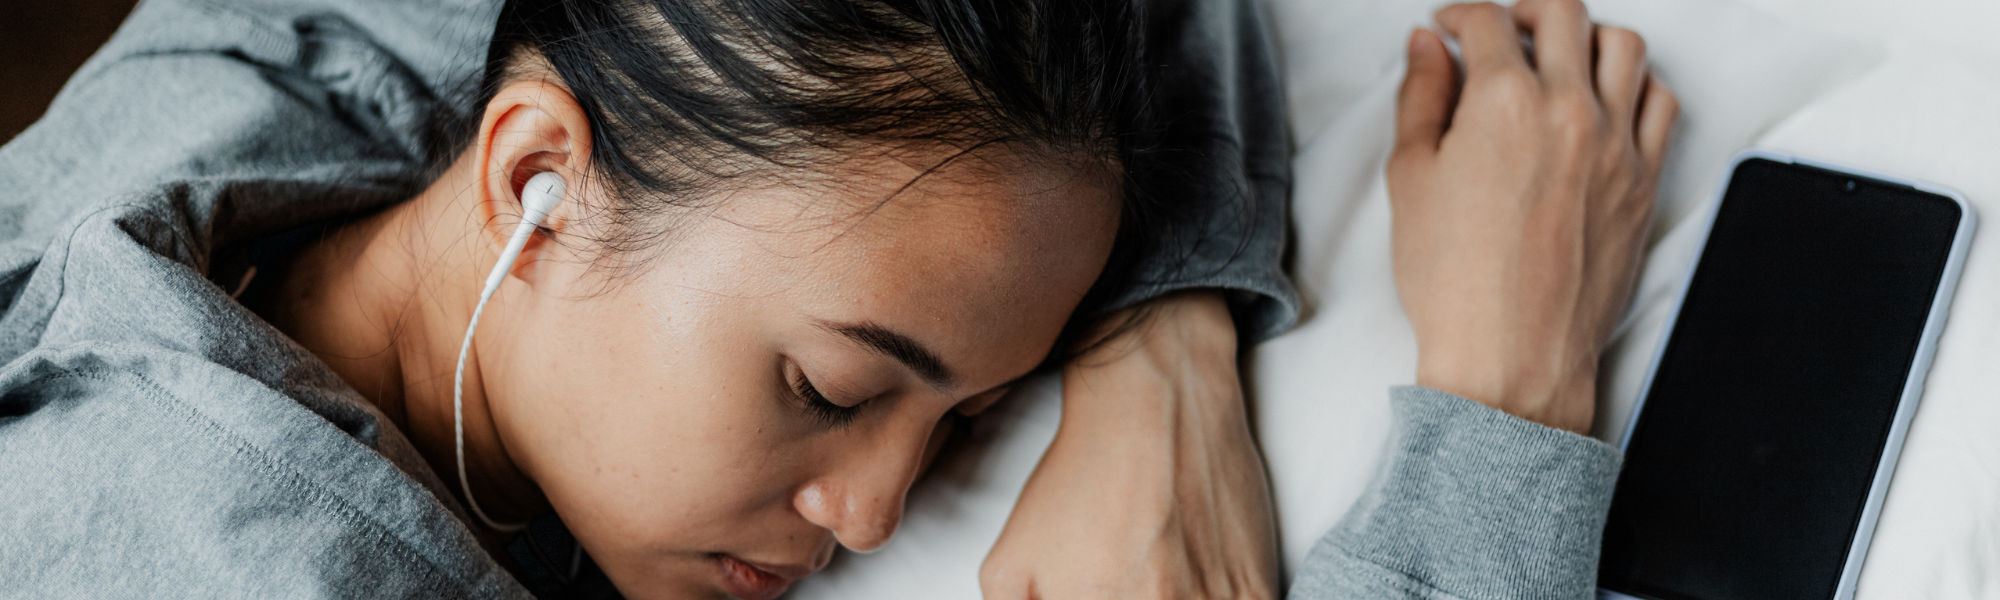 holistic approach to anxiety and depression | Functional Medicine Doctor Office in Overland Park | Integrative Medicine Doctor Overland Park | chiropractic | holistic | naturopathic | alternative